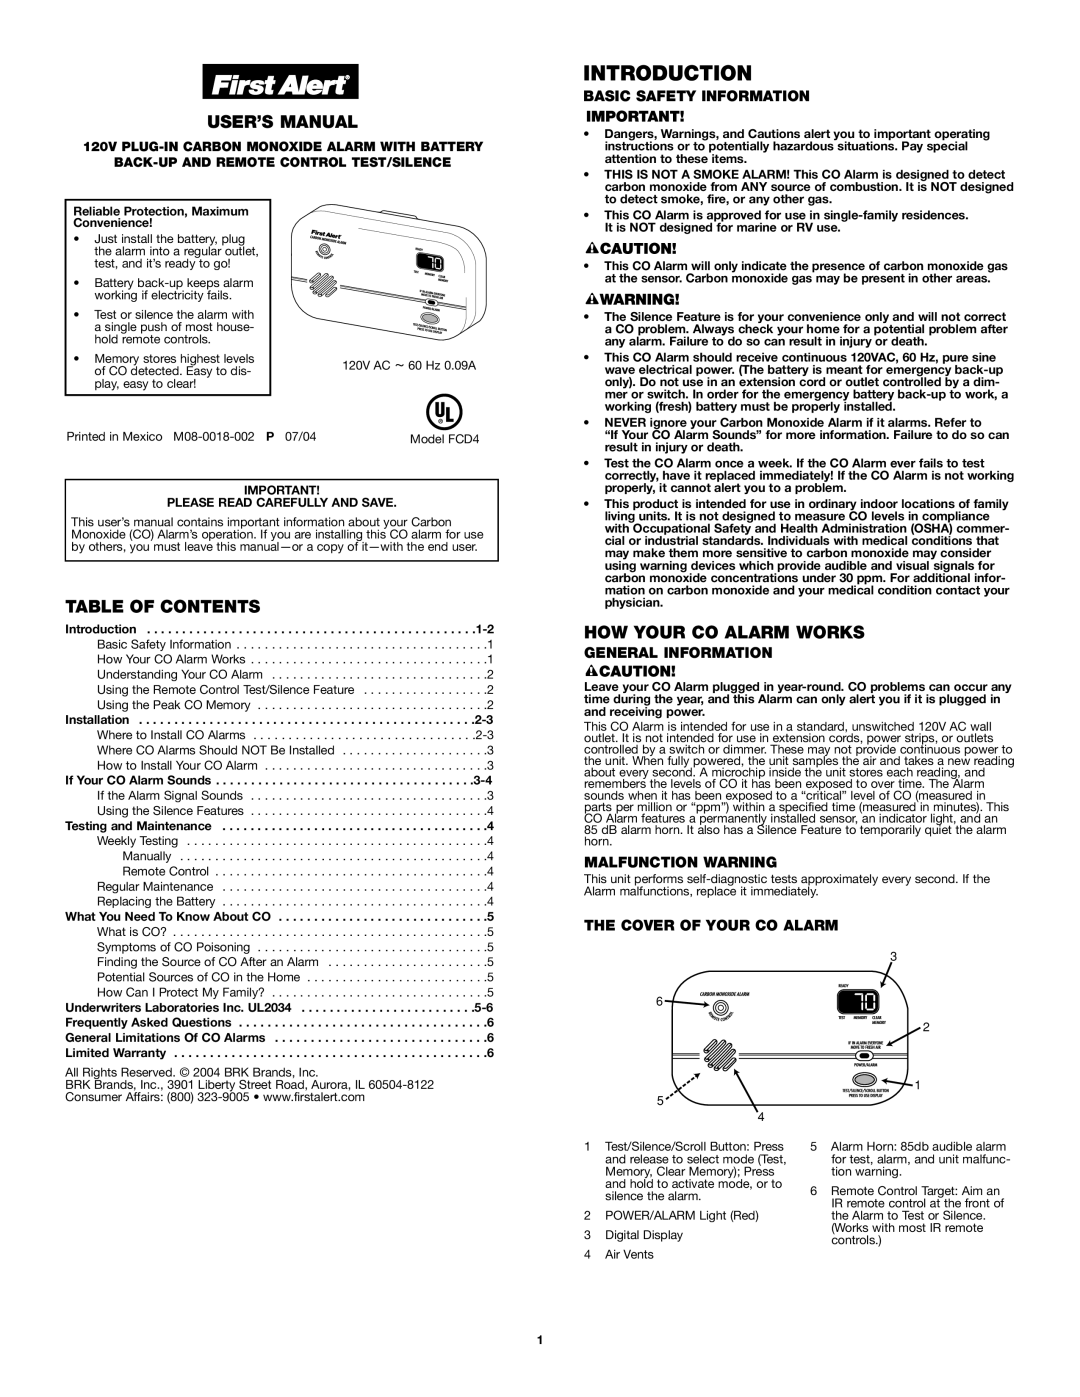 First Alert FCD4 user manual Introduction, Table Of Contents, How Your Co Alarm Works, Basic Safety Information 